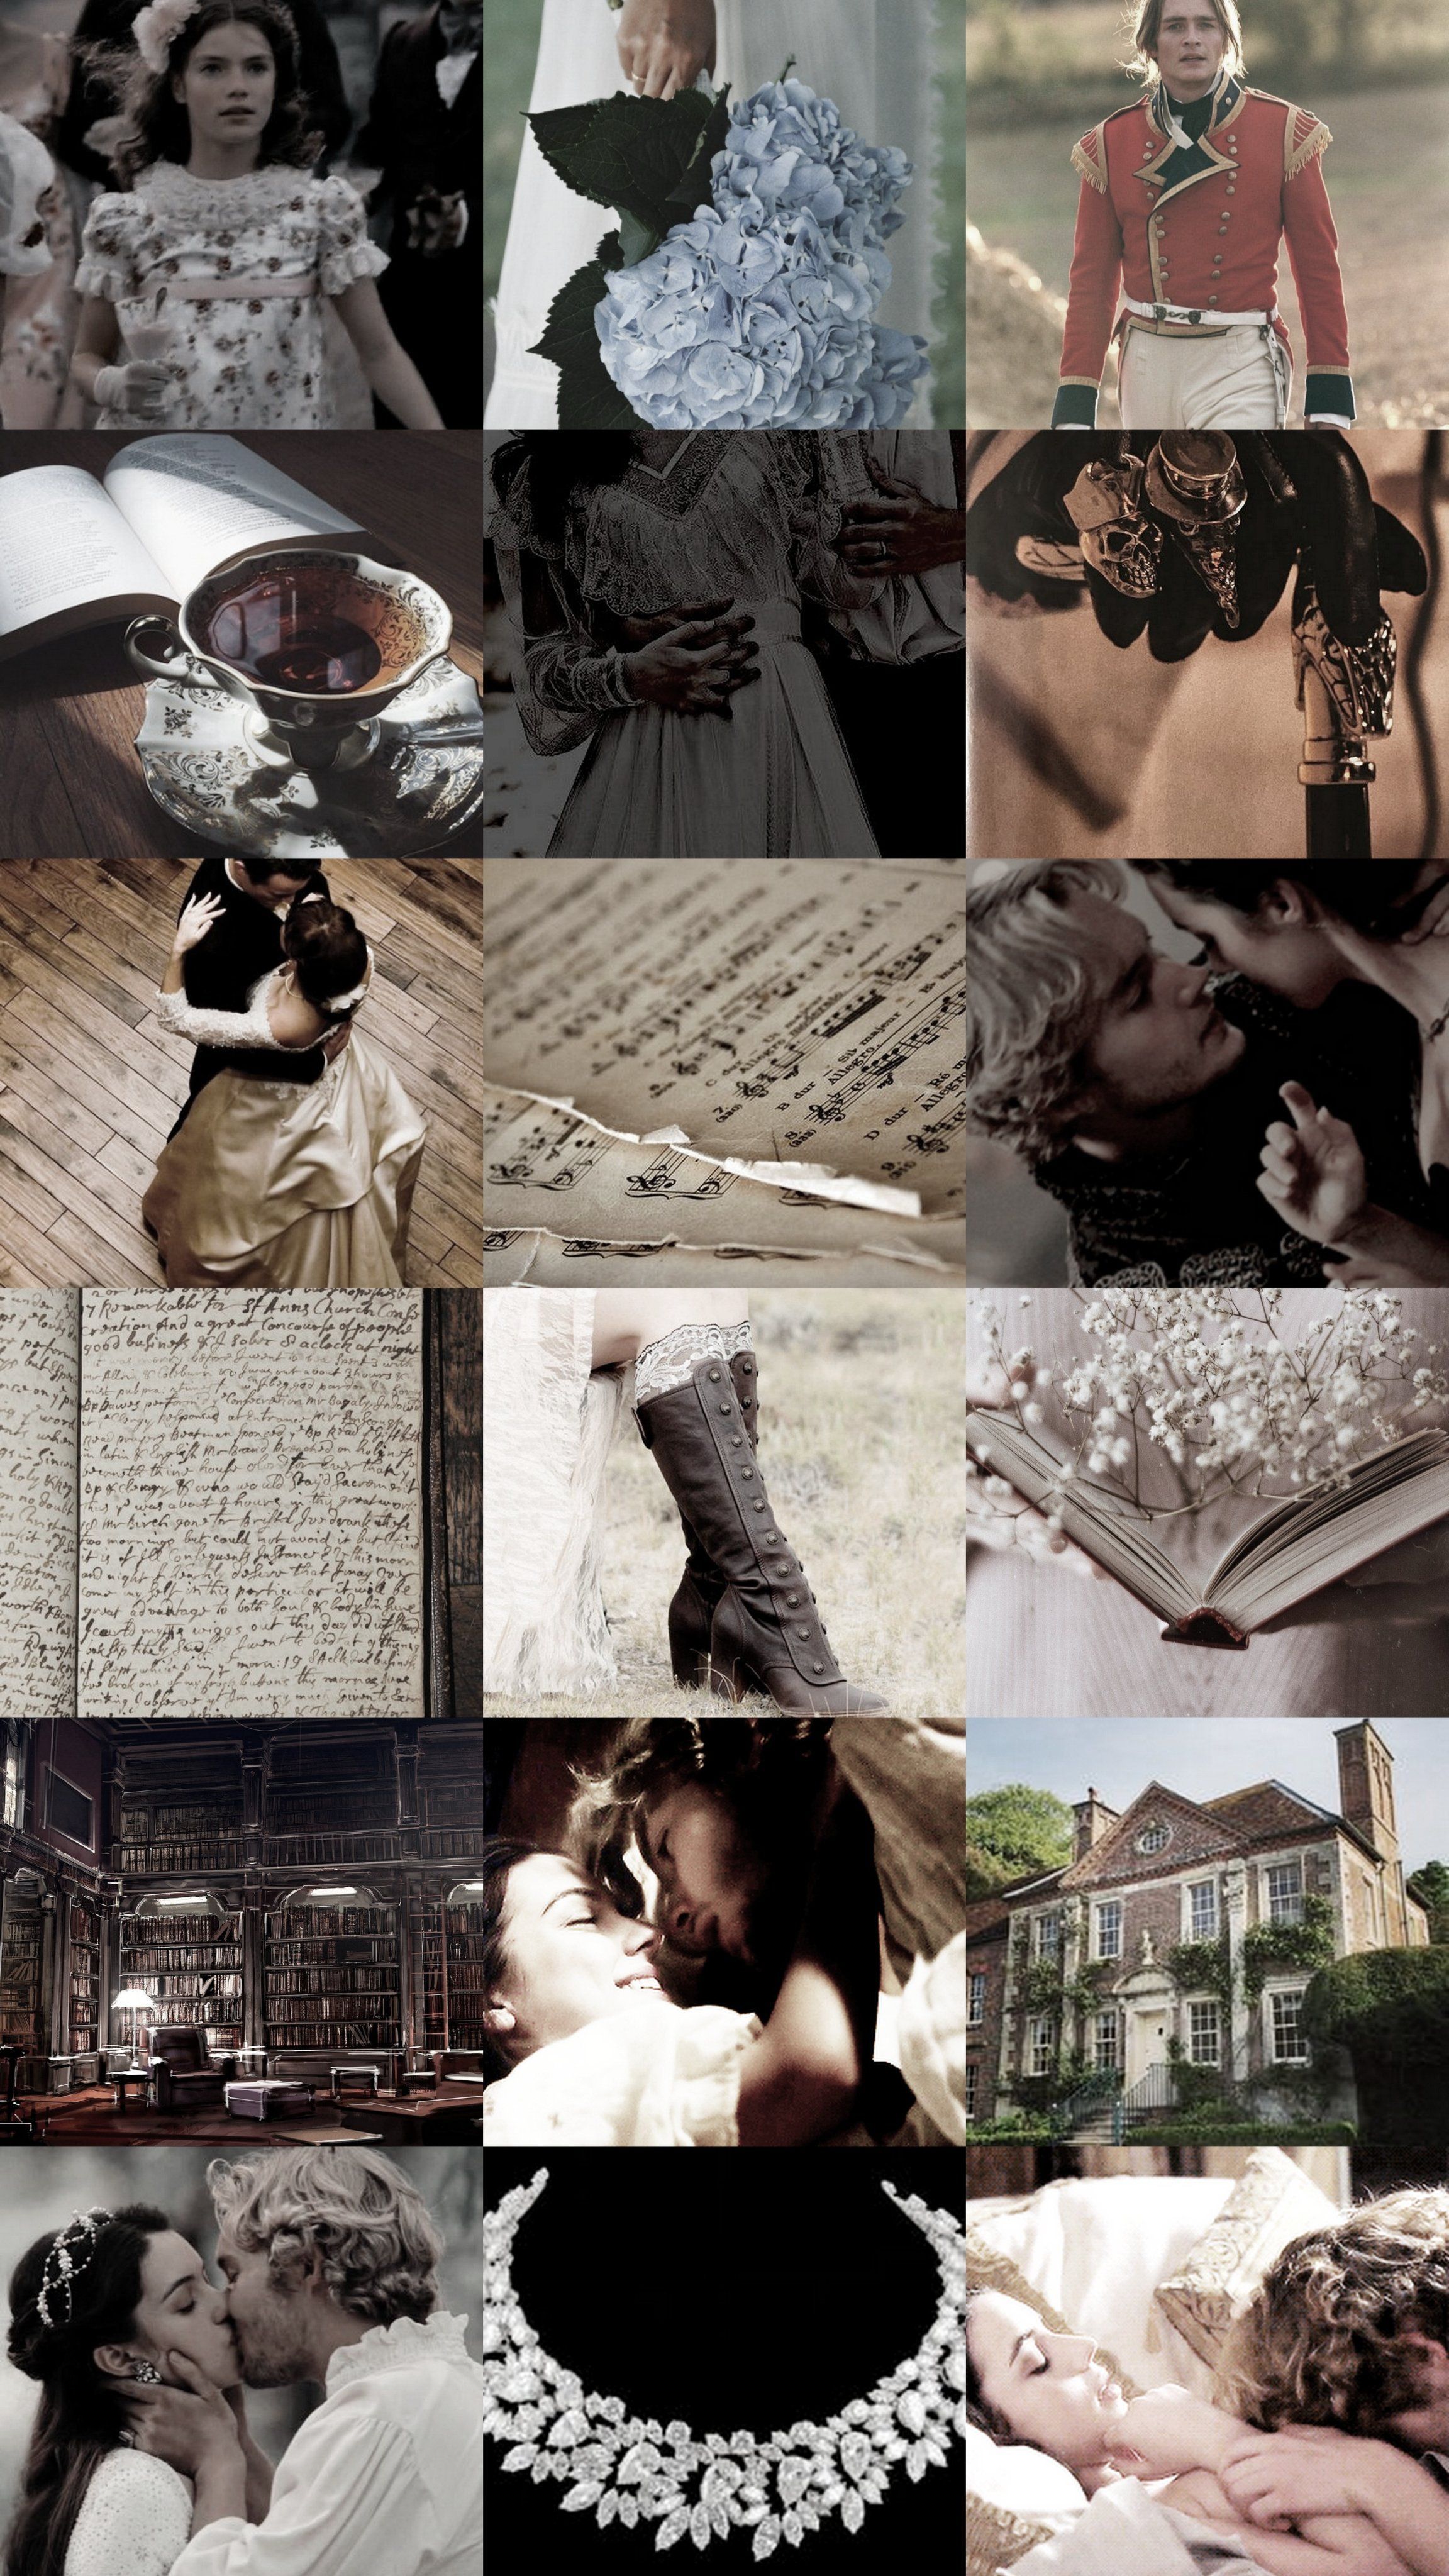 A collage of images from the book Northanger Abbey by Jane Austen. - Bridgerton